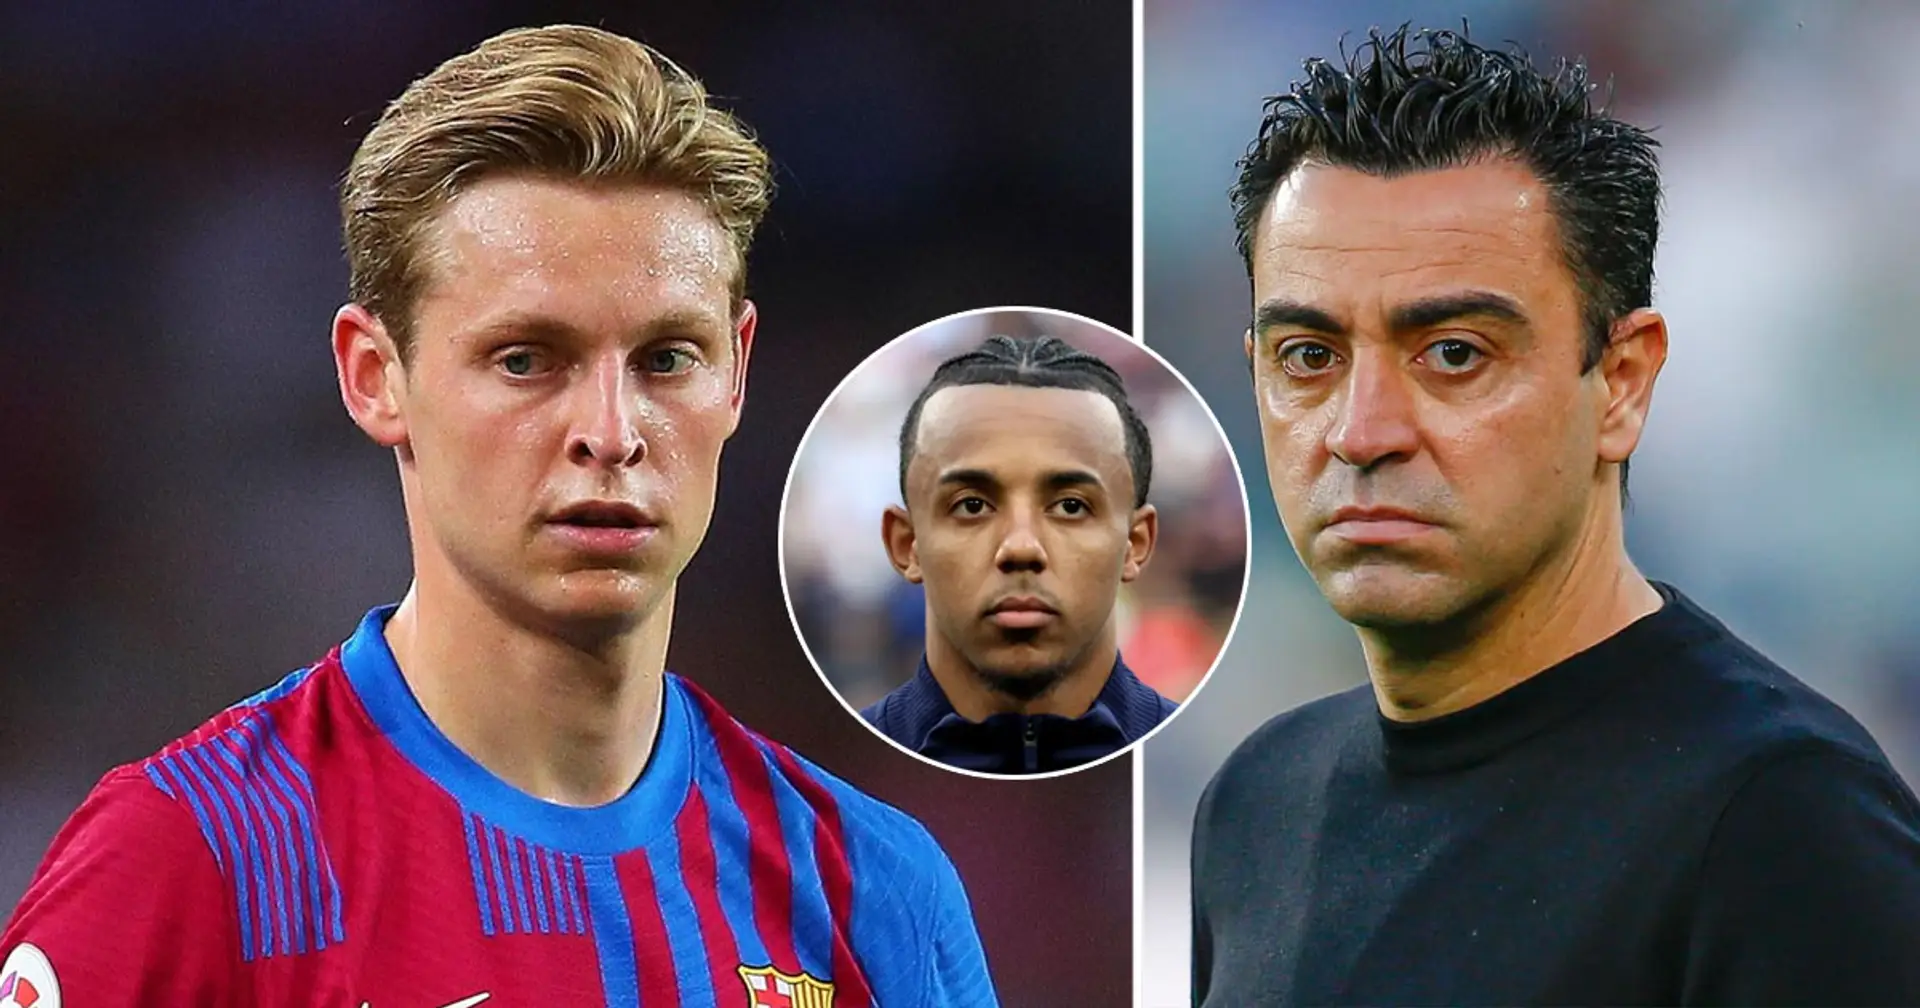 Xavi to ask De Jong to leave in personal meeting (reliability: 5 stars)